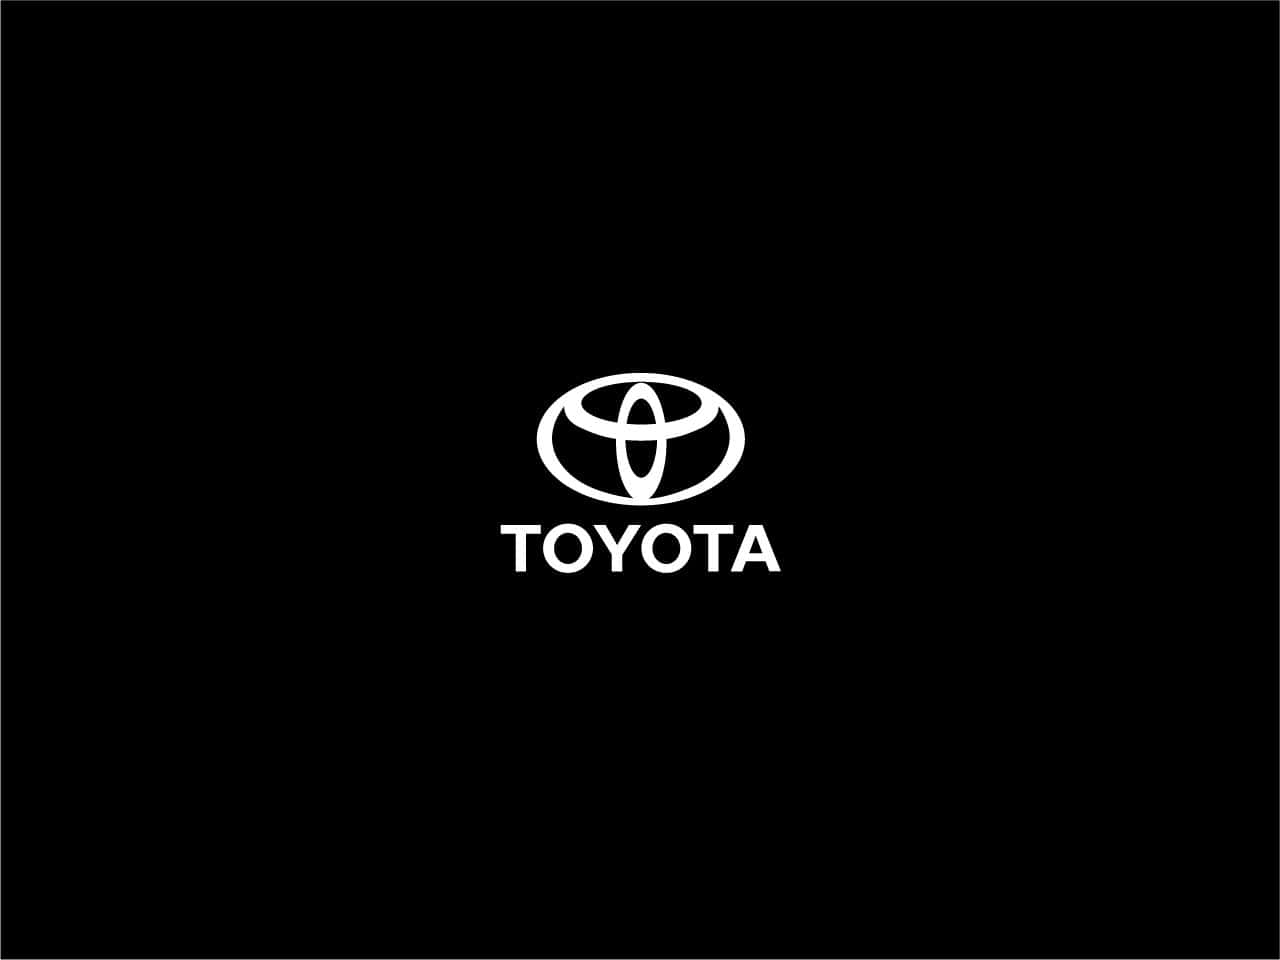 Driving towards the future with Toyota